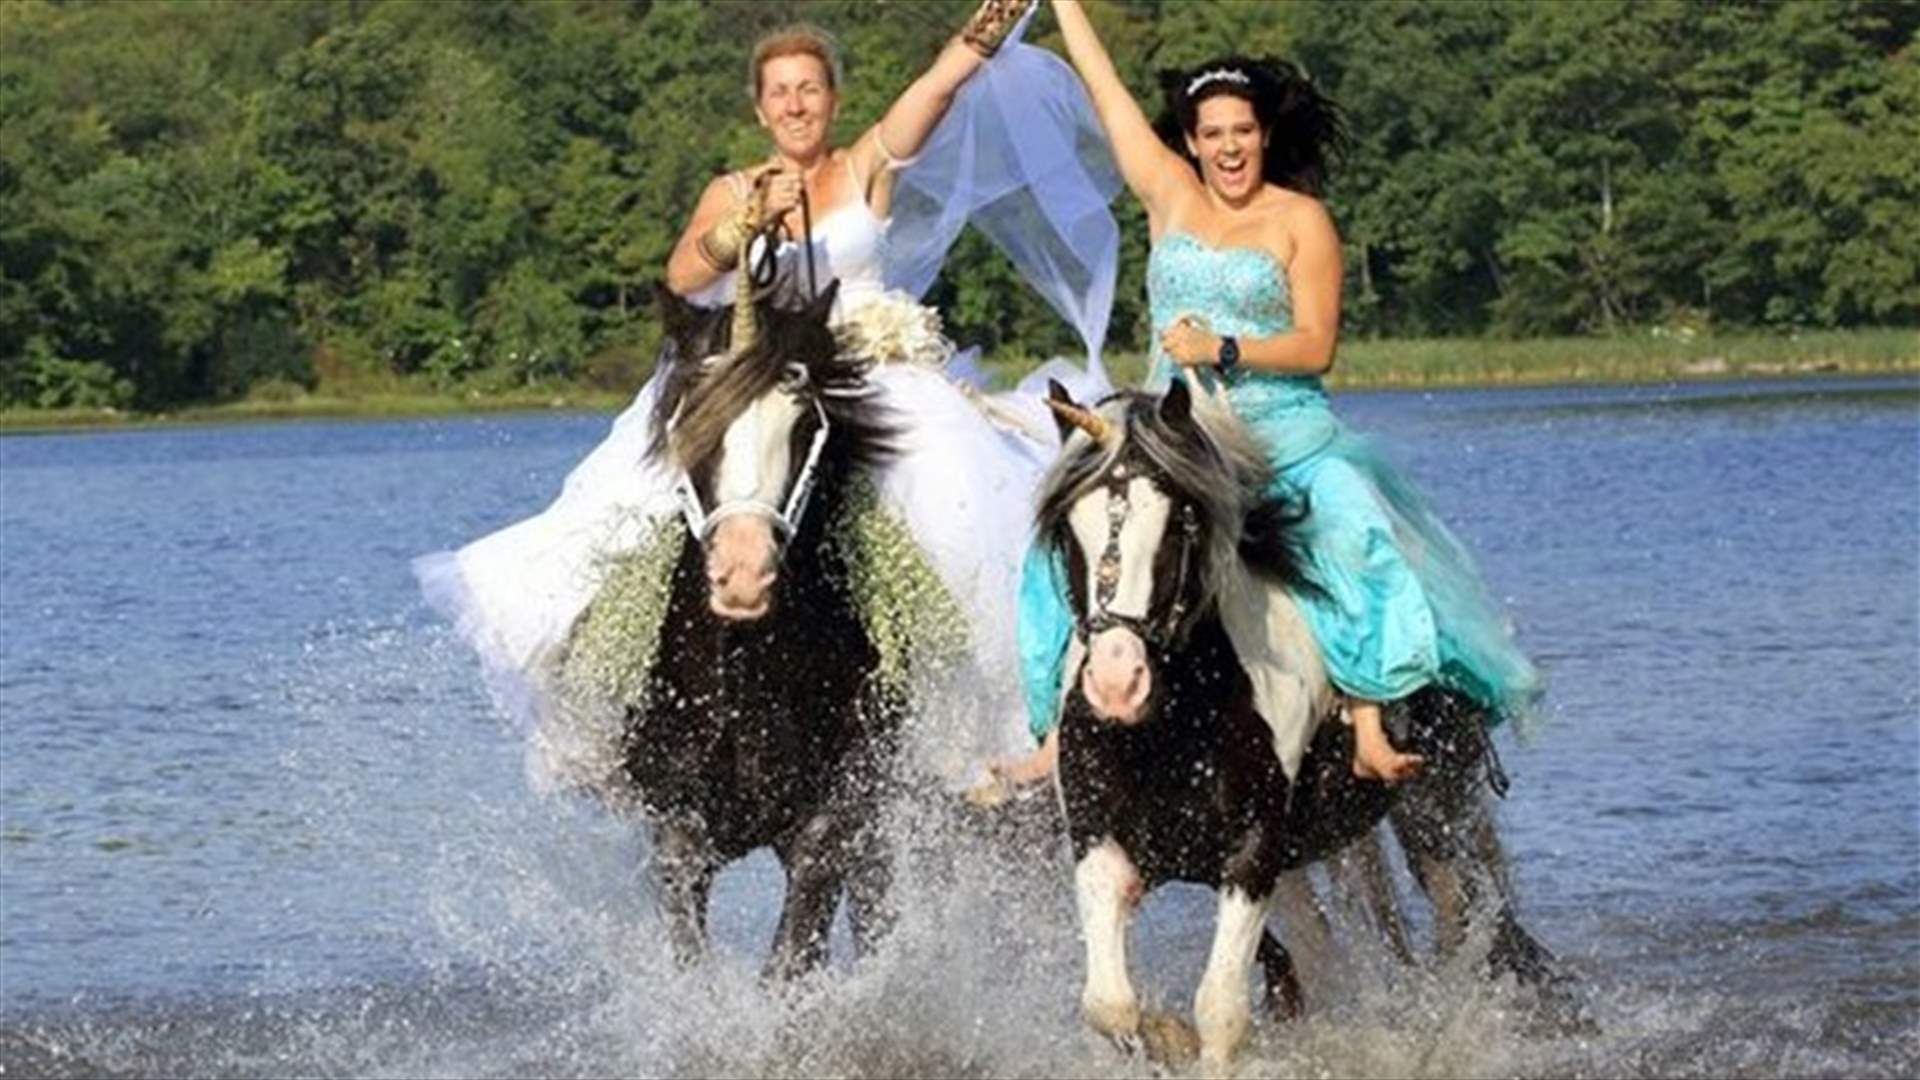 [PHOTOS] Bride Gets A Dunking After &#39;Unicorn&#39; Throws Her Into River 